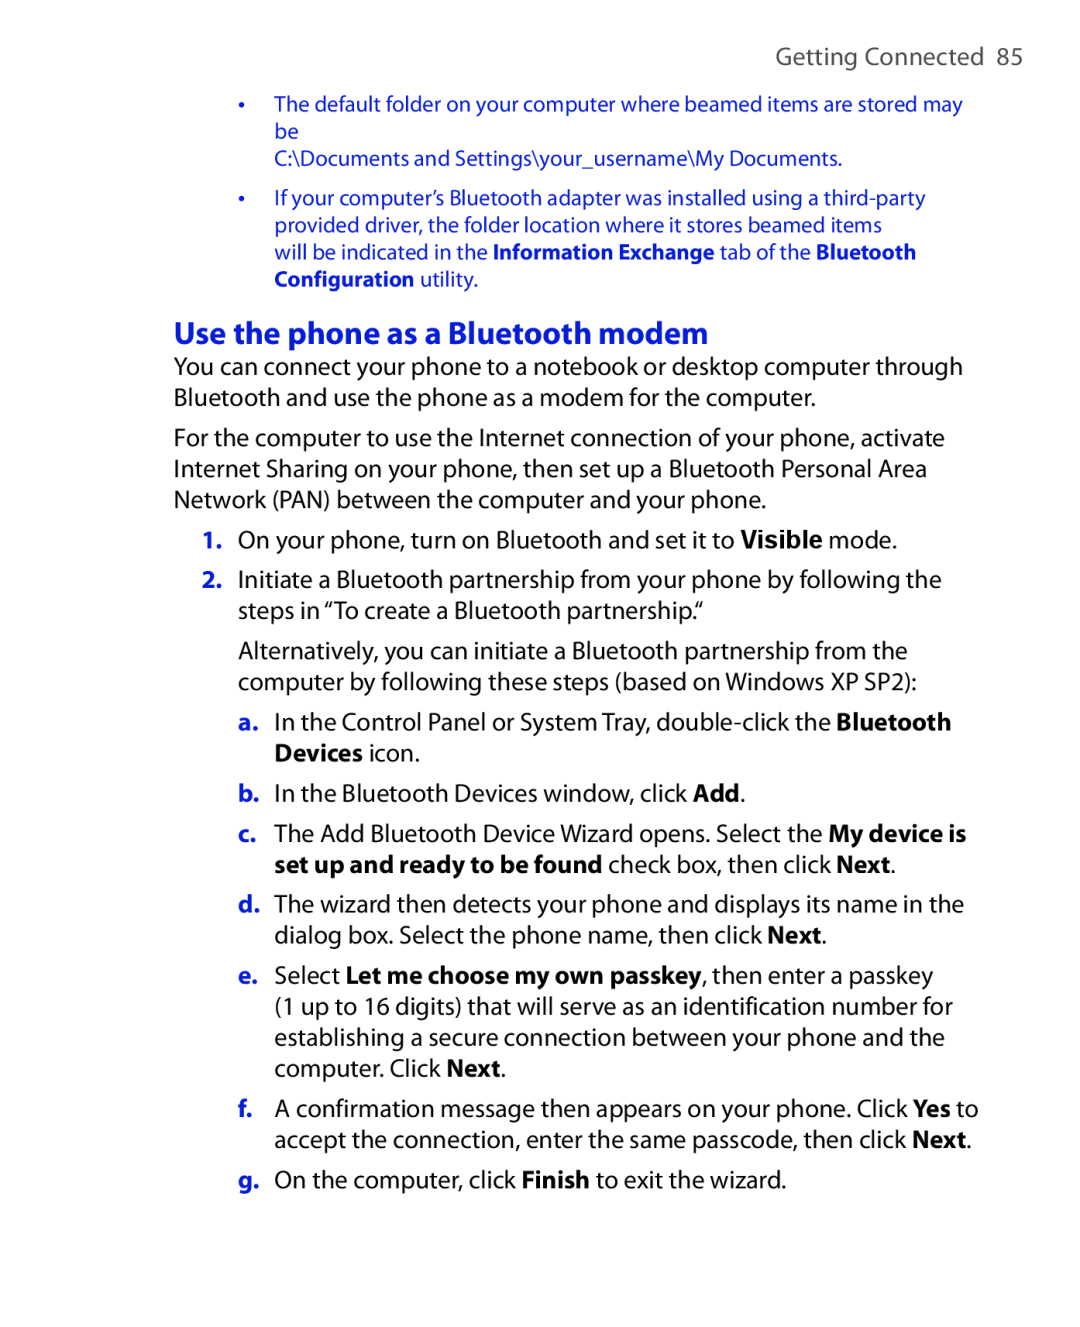 HTC HTC S621 user manual Use the phone as a Bluetooth modem, Getting Connected 